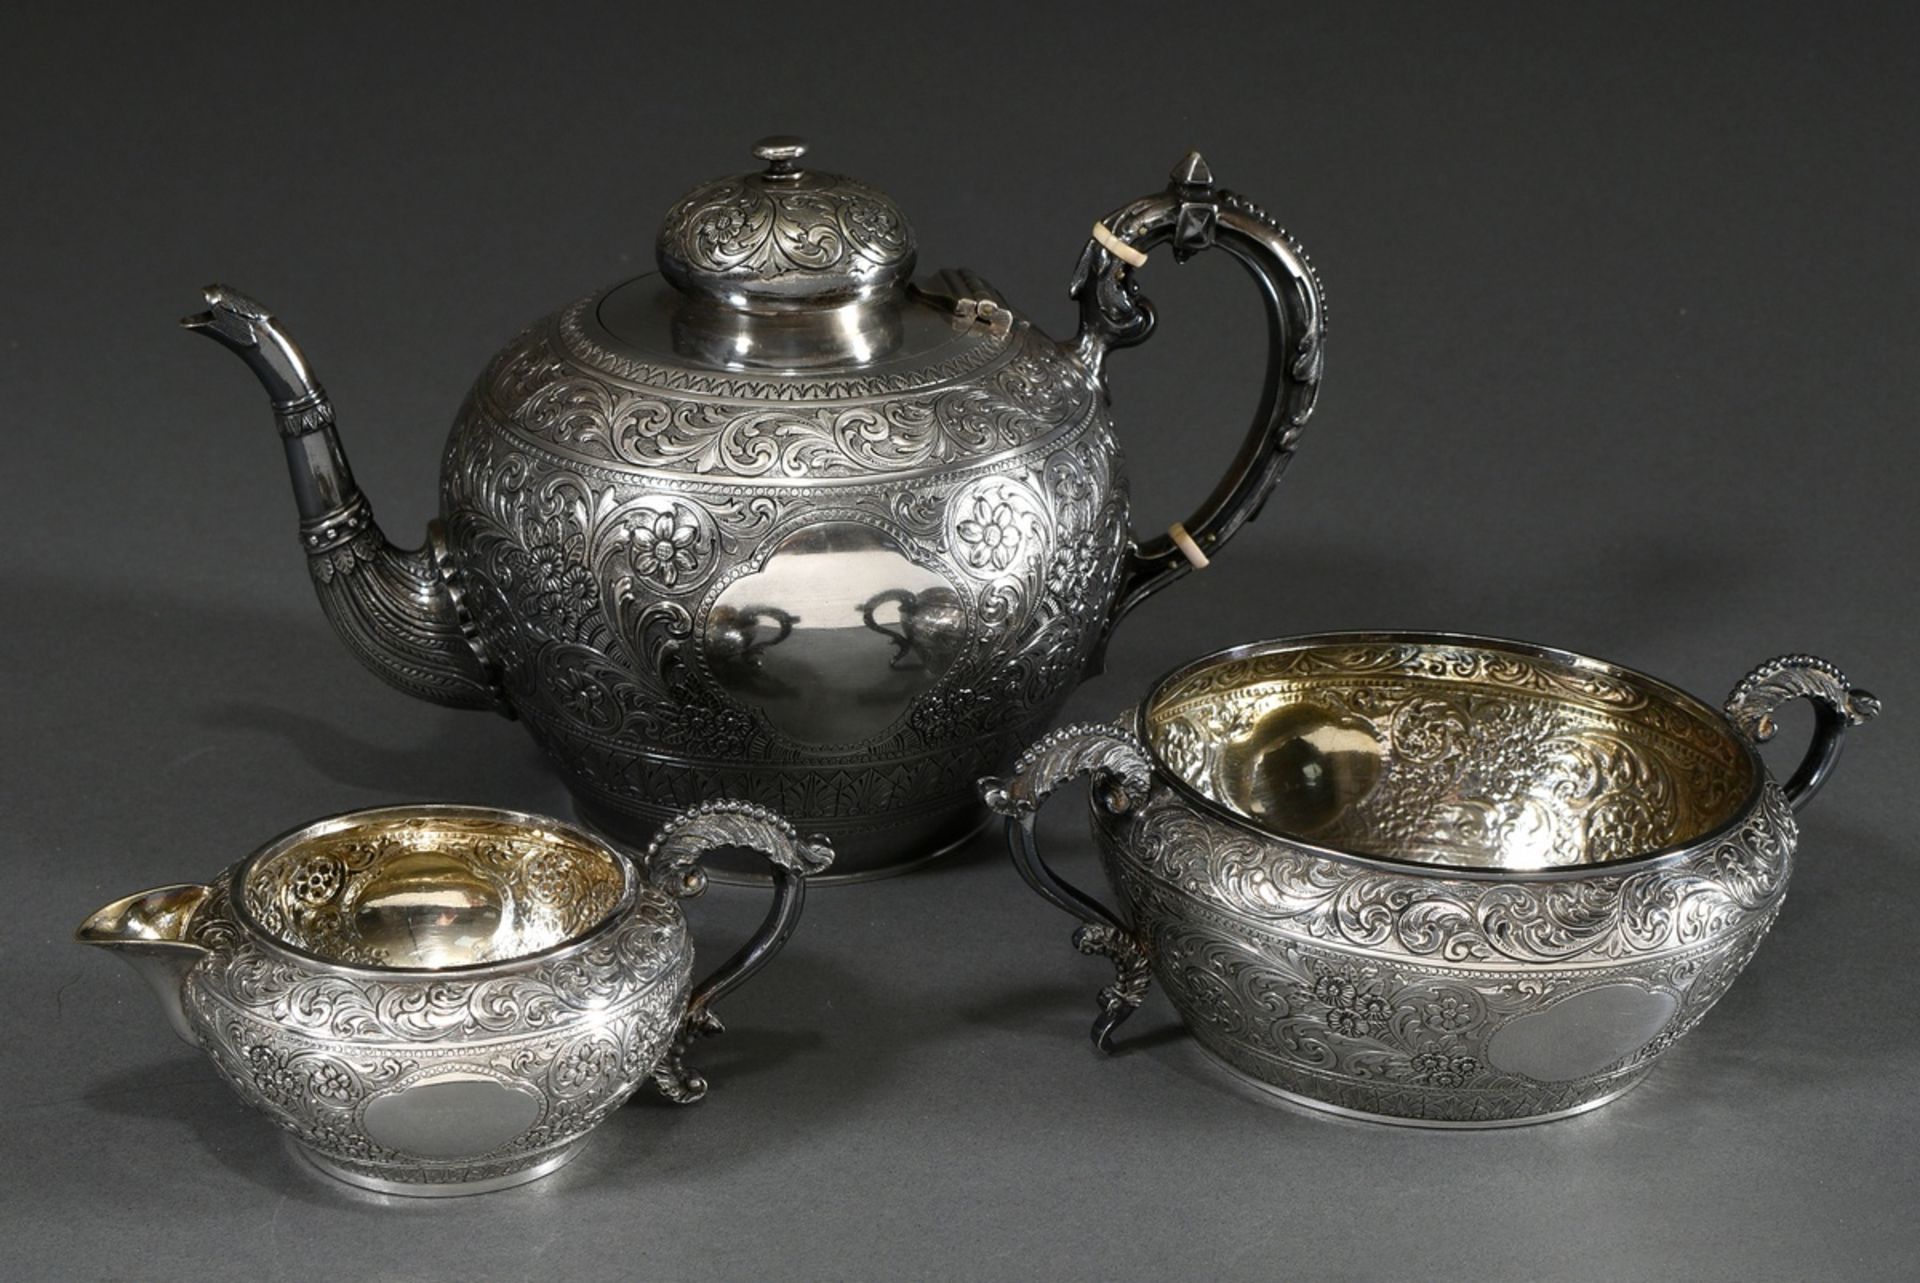 3 Pieces English tea set with rich floral-ornamental engraving after oriental model, Mappin & Webb/